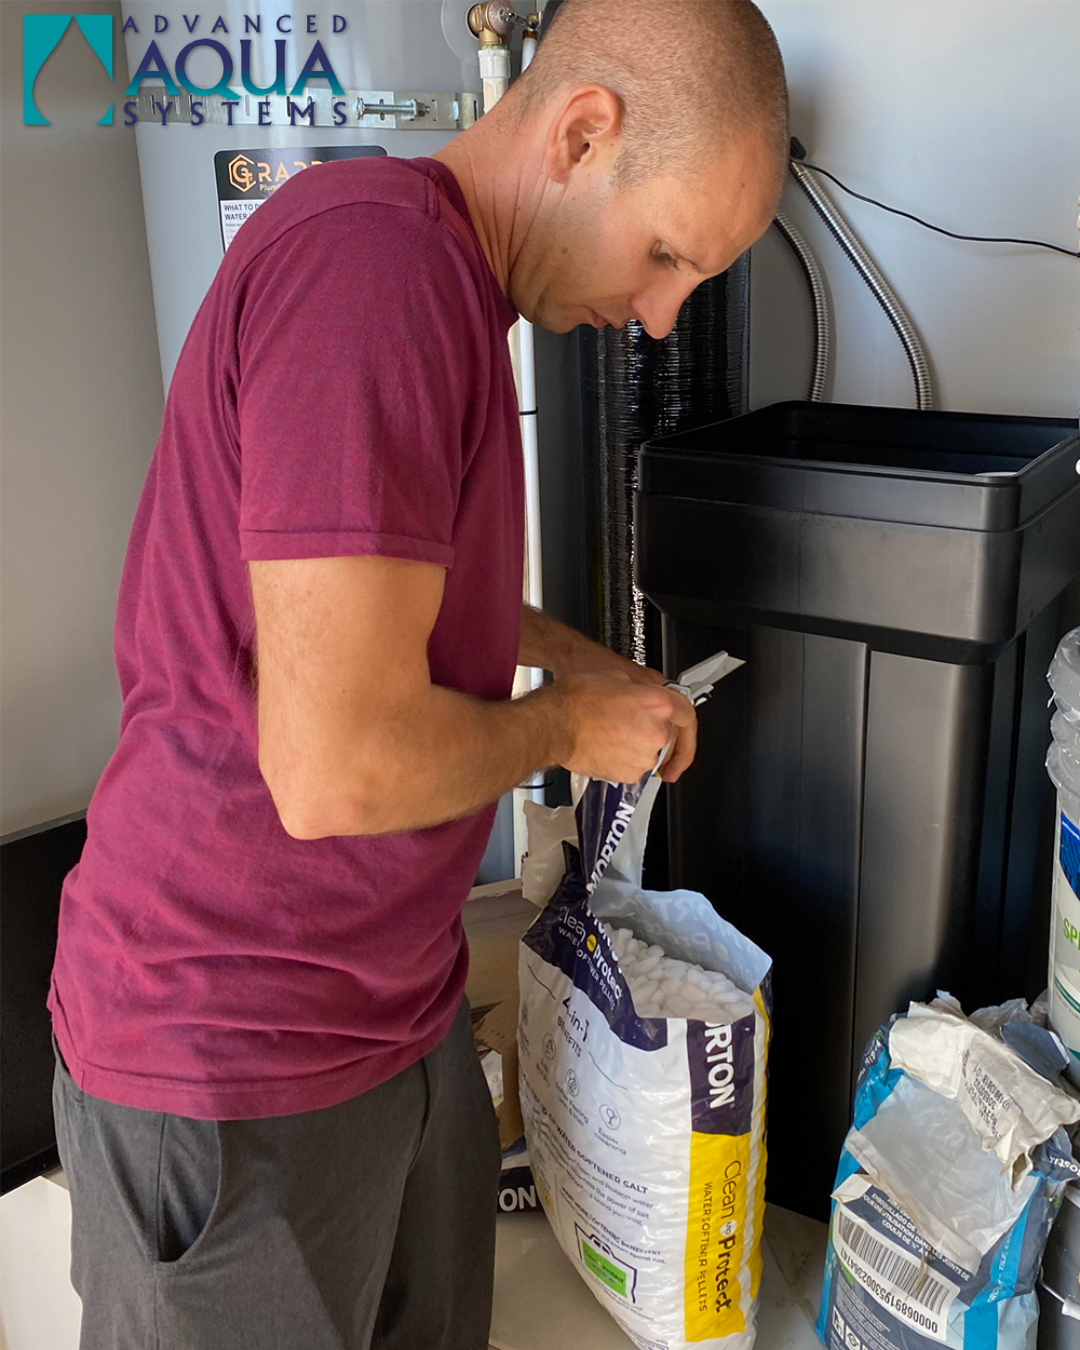 An Advanced Aqua Systems technician adds salt pellets to a soft water system in a home in St. George, Utah.